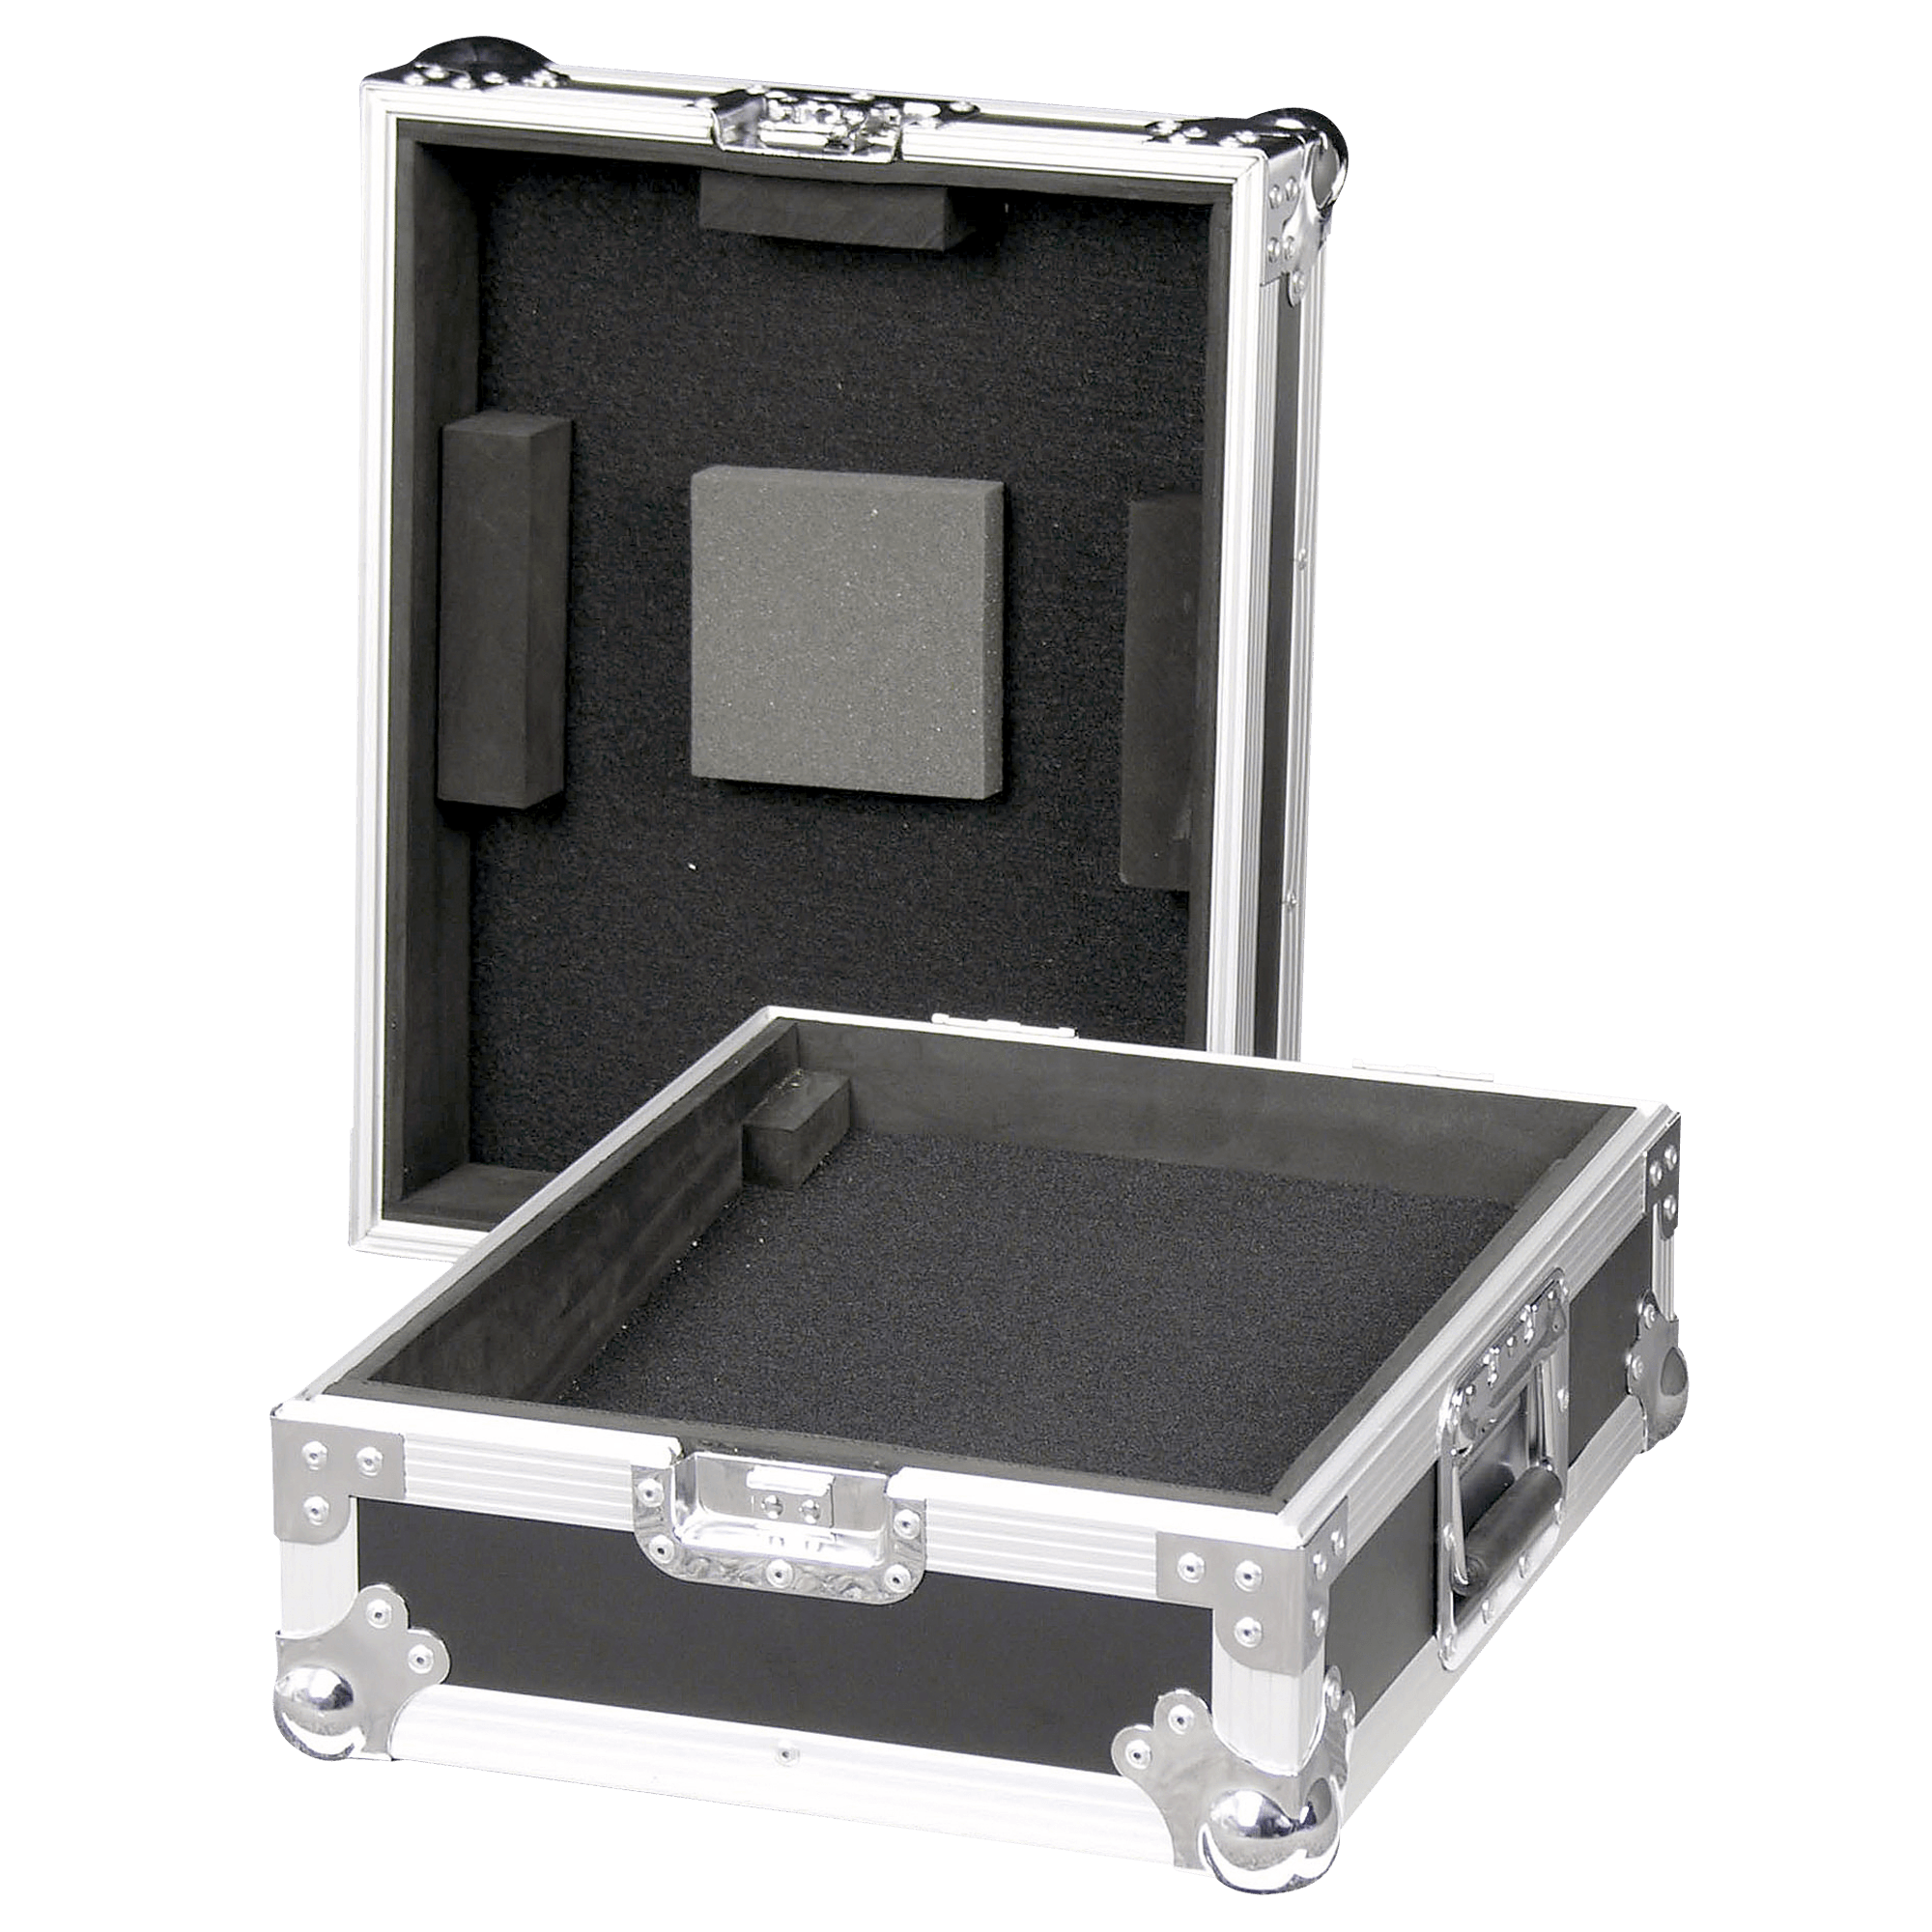 Showgear Case for Pioneer/Technics mixer With protective foam - DY Pro Audio